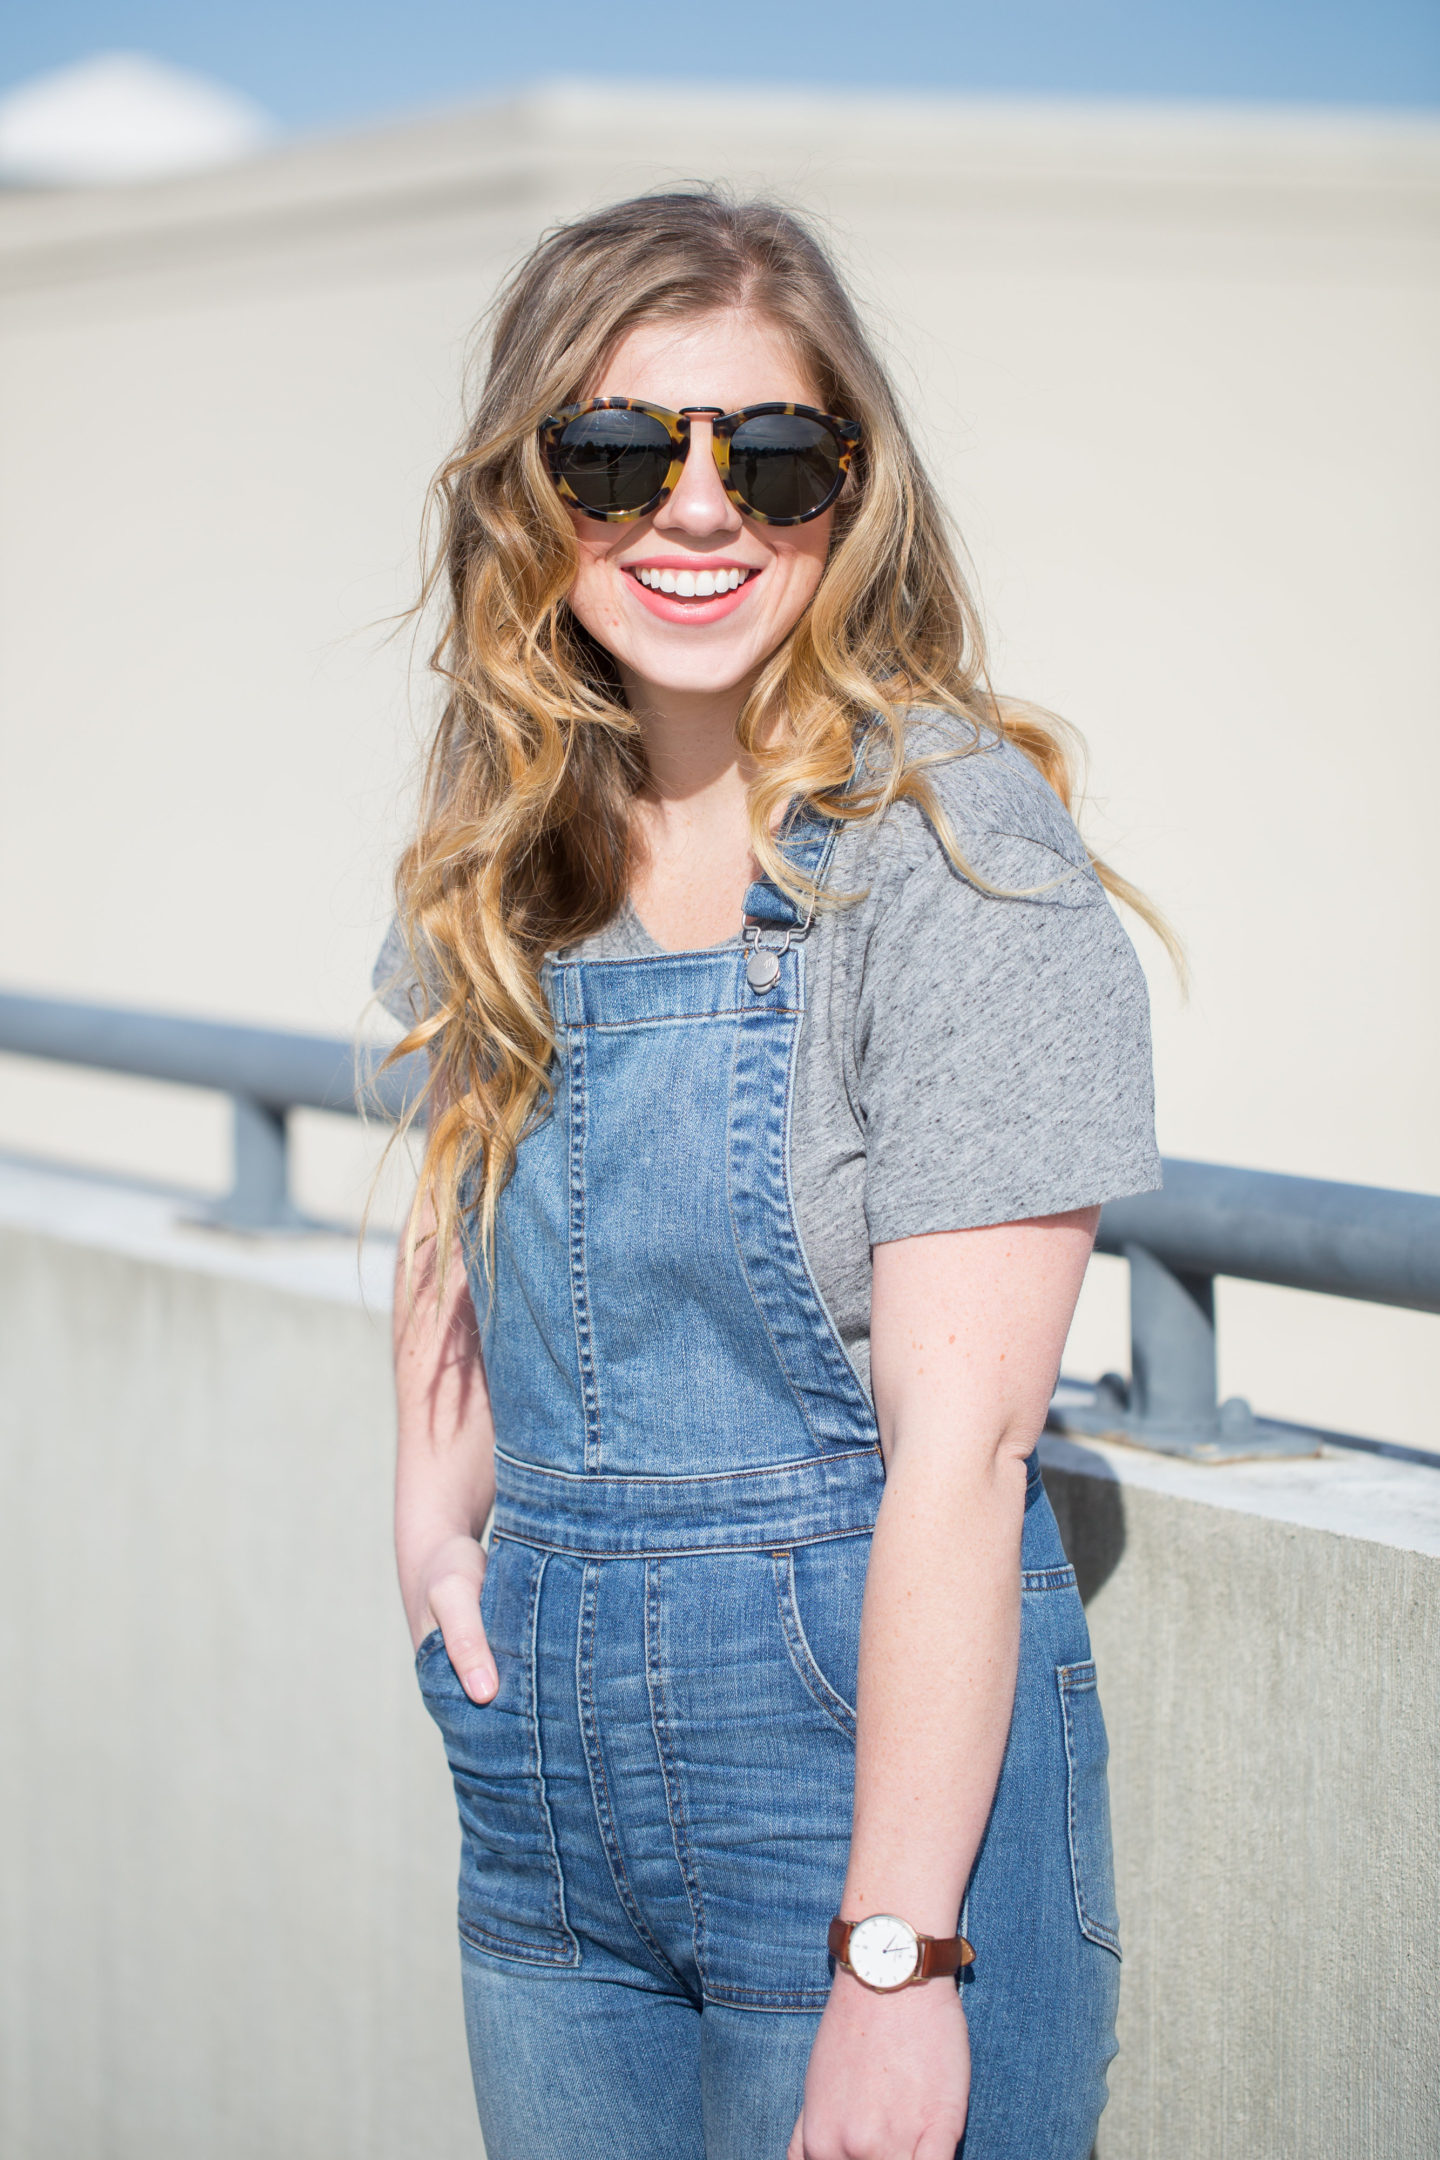 Casual Overalls For Weekend Living | Louella Reese